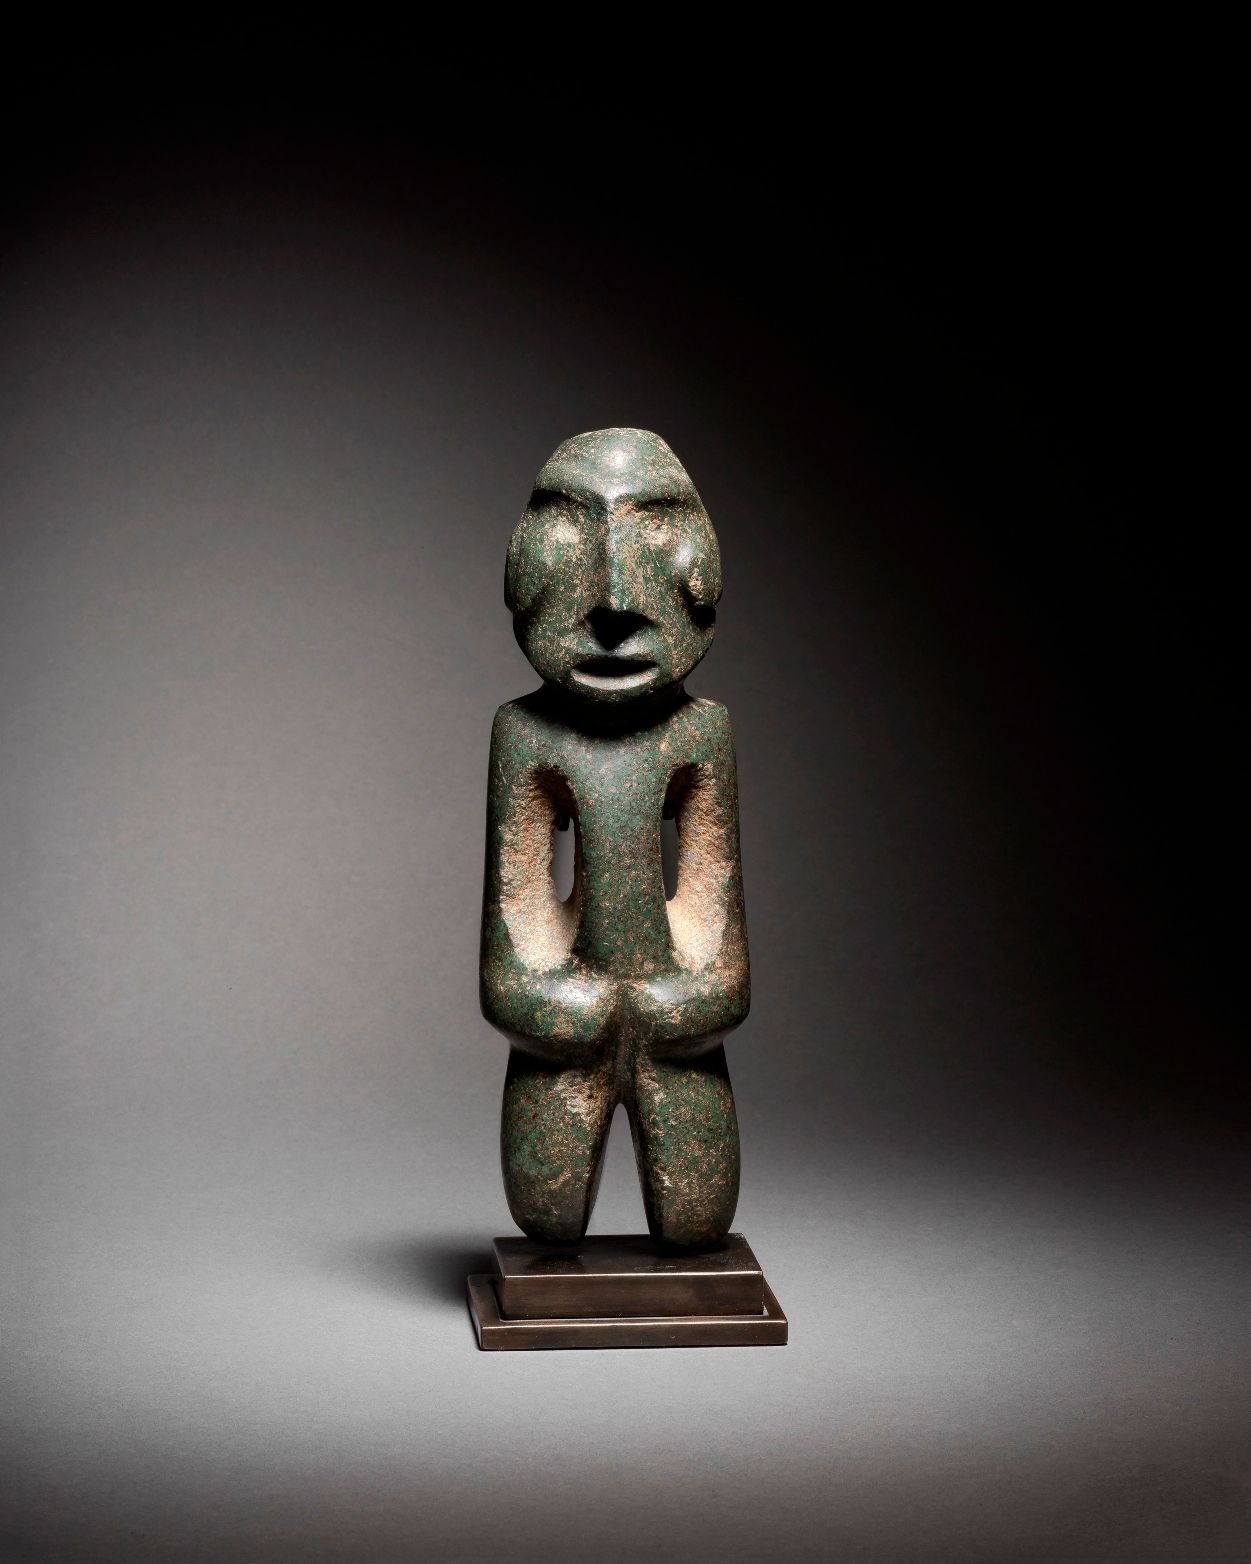 Null FIGURE STANDING AT STAINLESS ARM
MEZCALA CULTURE, STATE OF GUERRERO, MEXICO&hellip;